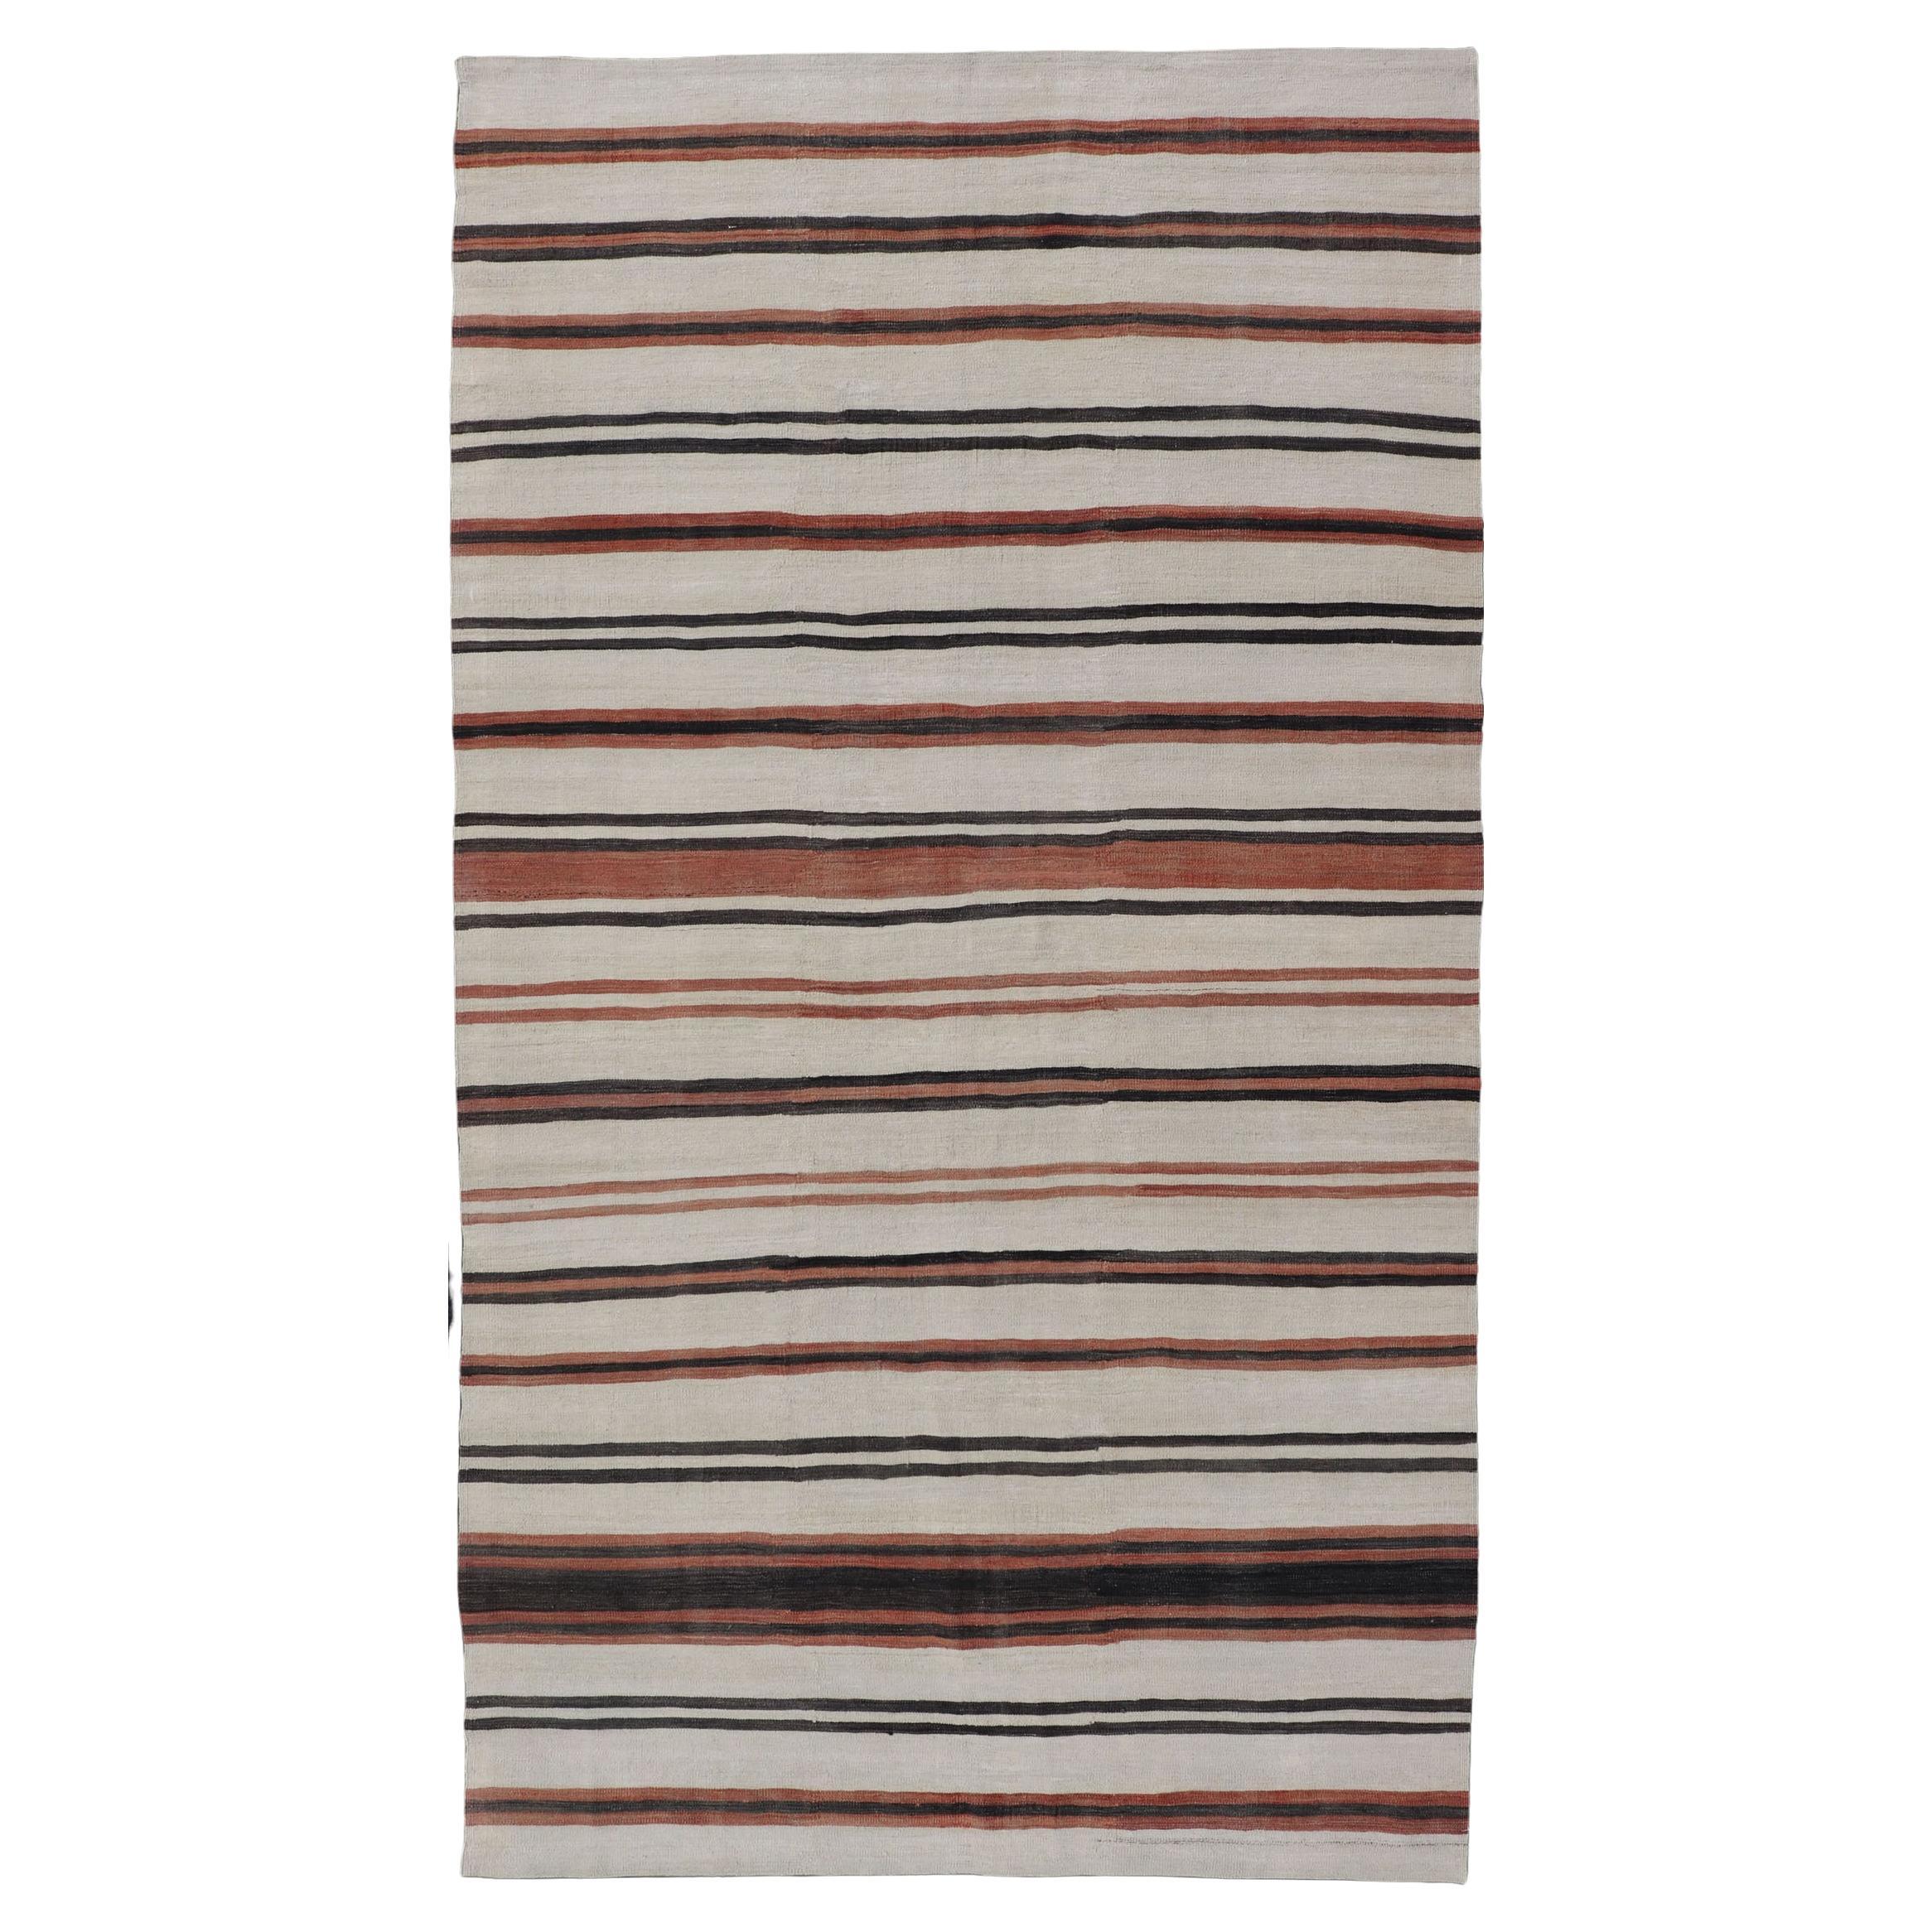 Vintage Turkish Kilim Gallery with Stripes in Cream, Brown & Soft Coral Color